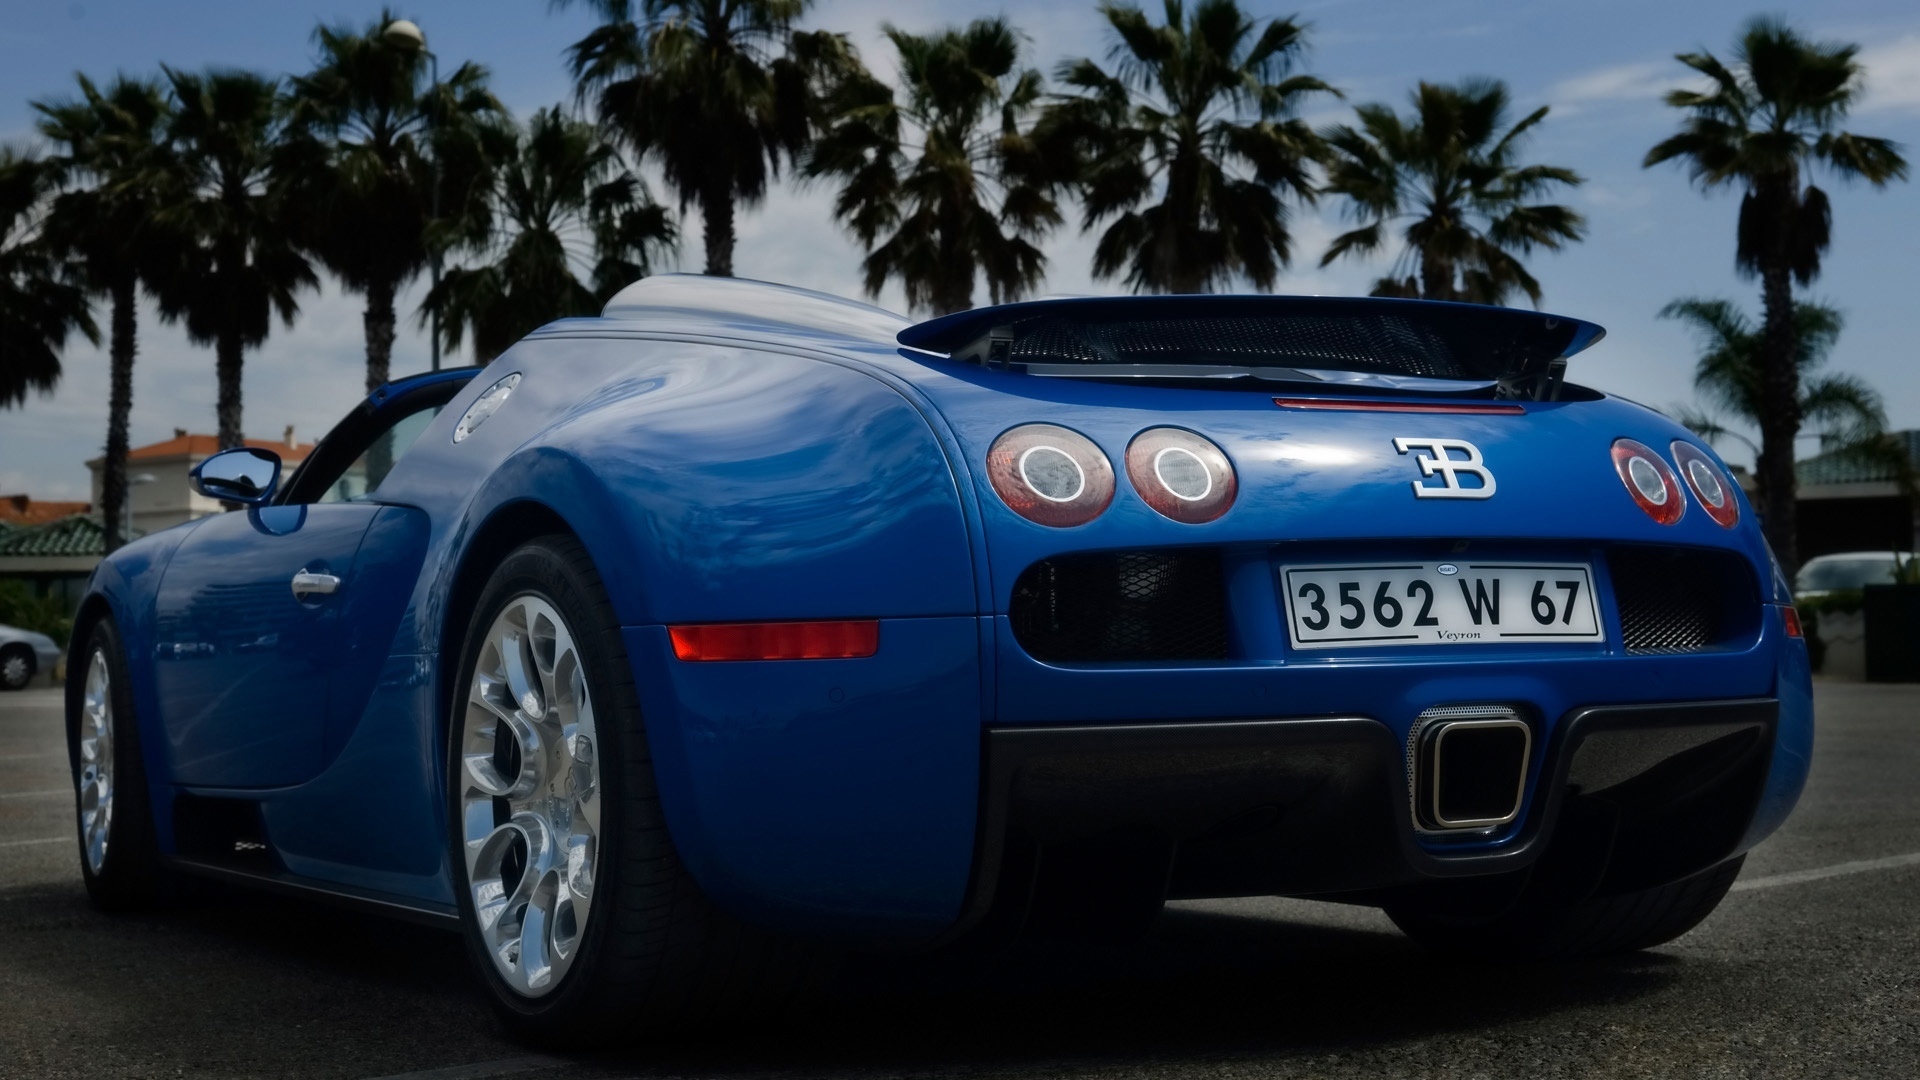 Bugatti Veyron 16.4 Grand Sport 2010 in Cannes - Rear Angle 2 for 1920 x 1080 HDTV 1080p resolution